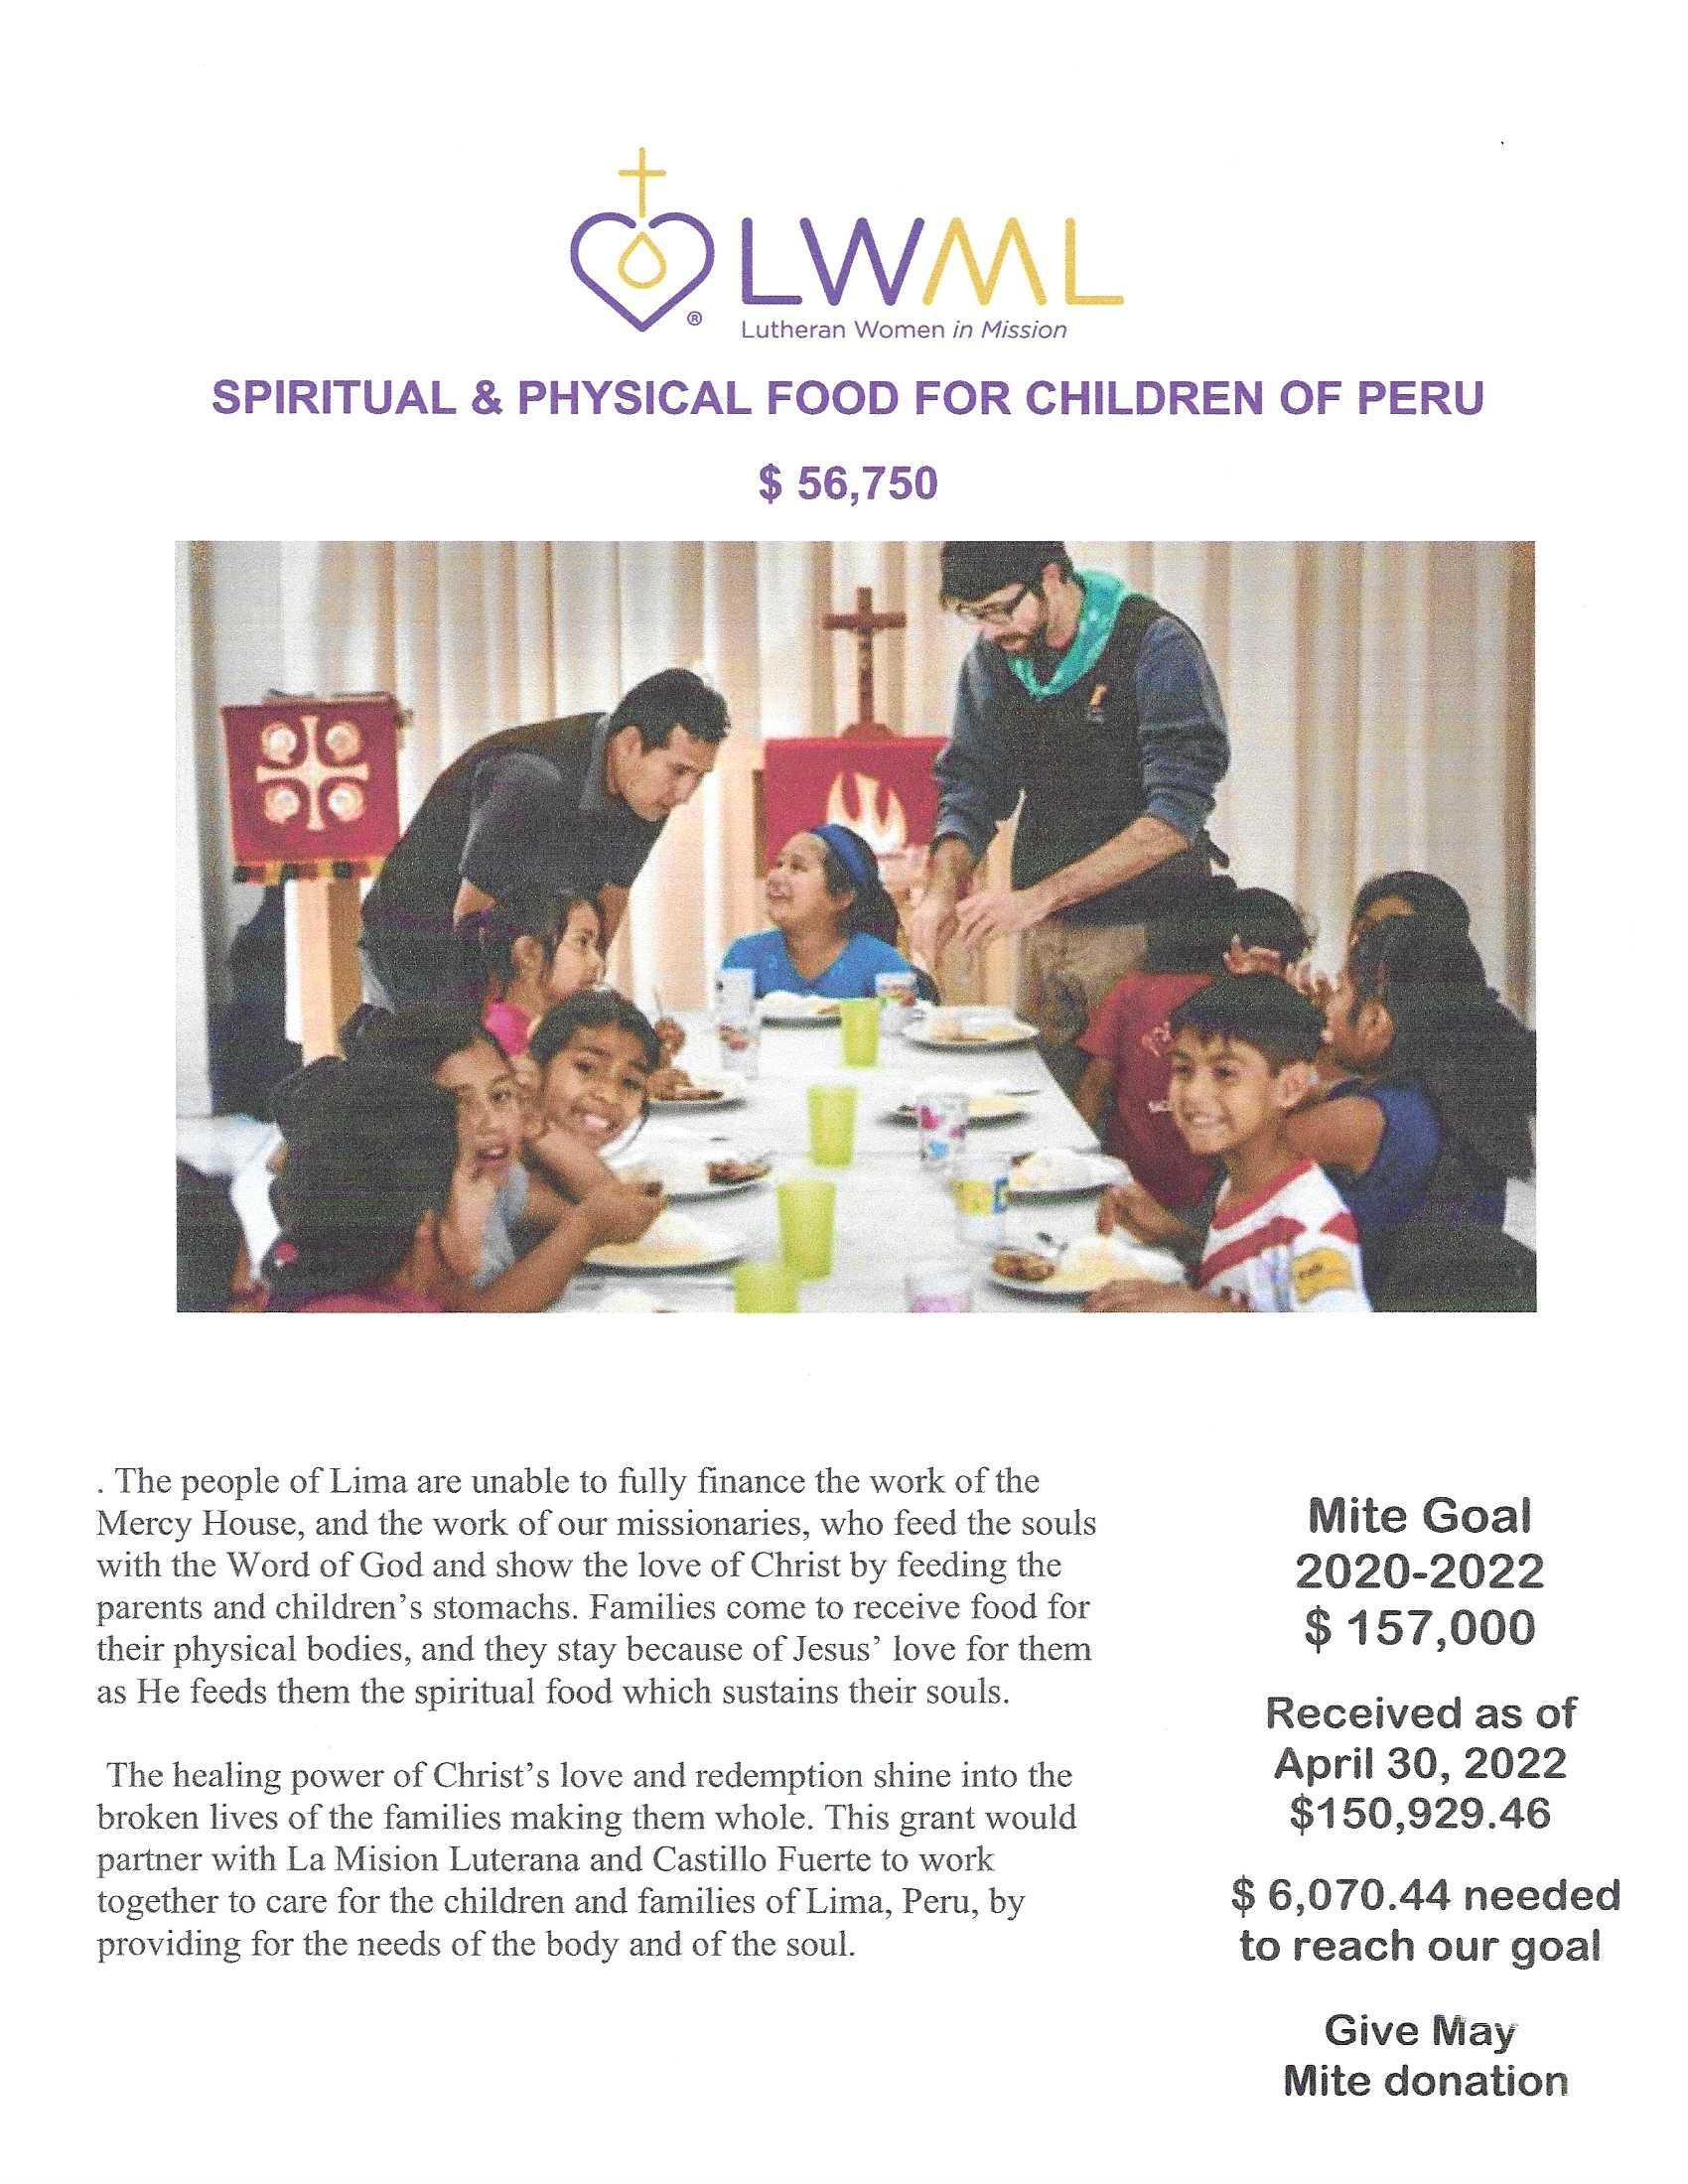 Spiritual & physical food for children of Peru $56,750 mission grant